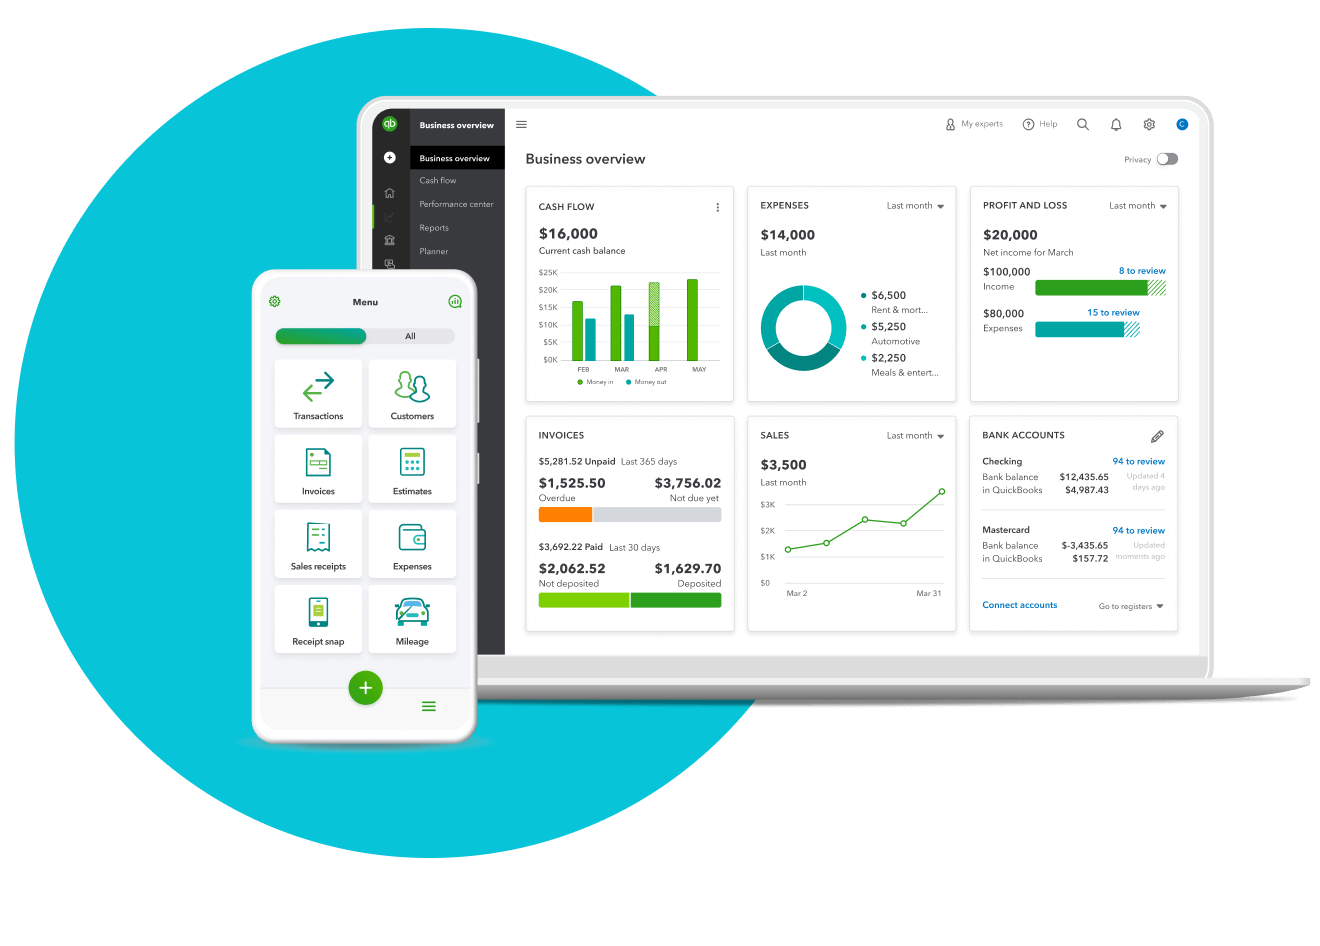 Intuit QuickBooks launches QuickBooks Online Accountant in more than 170 countries around the world